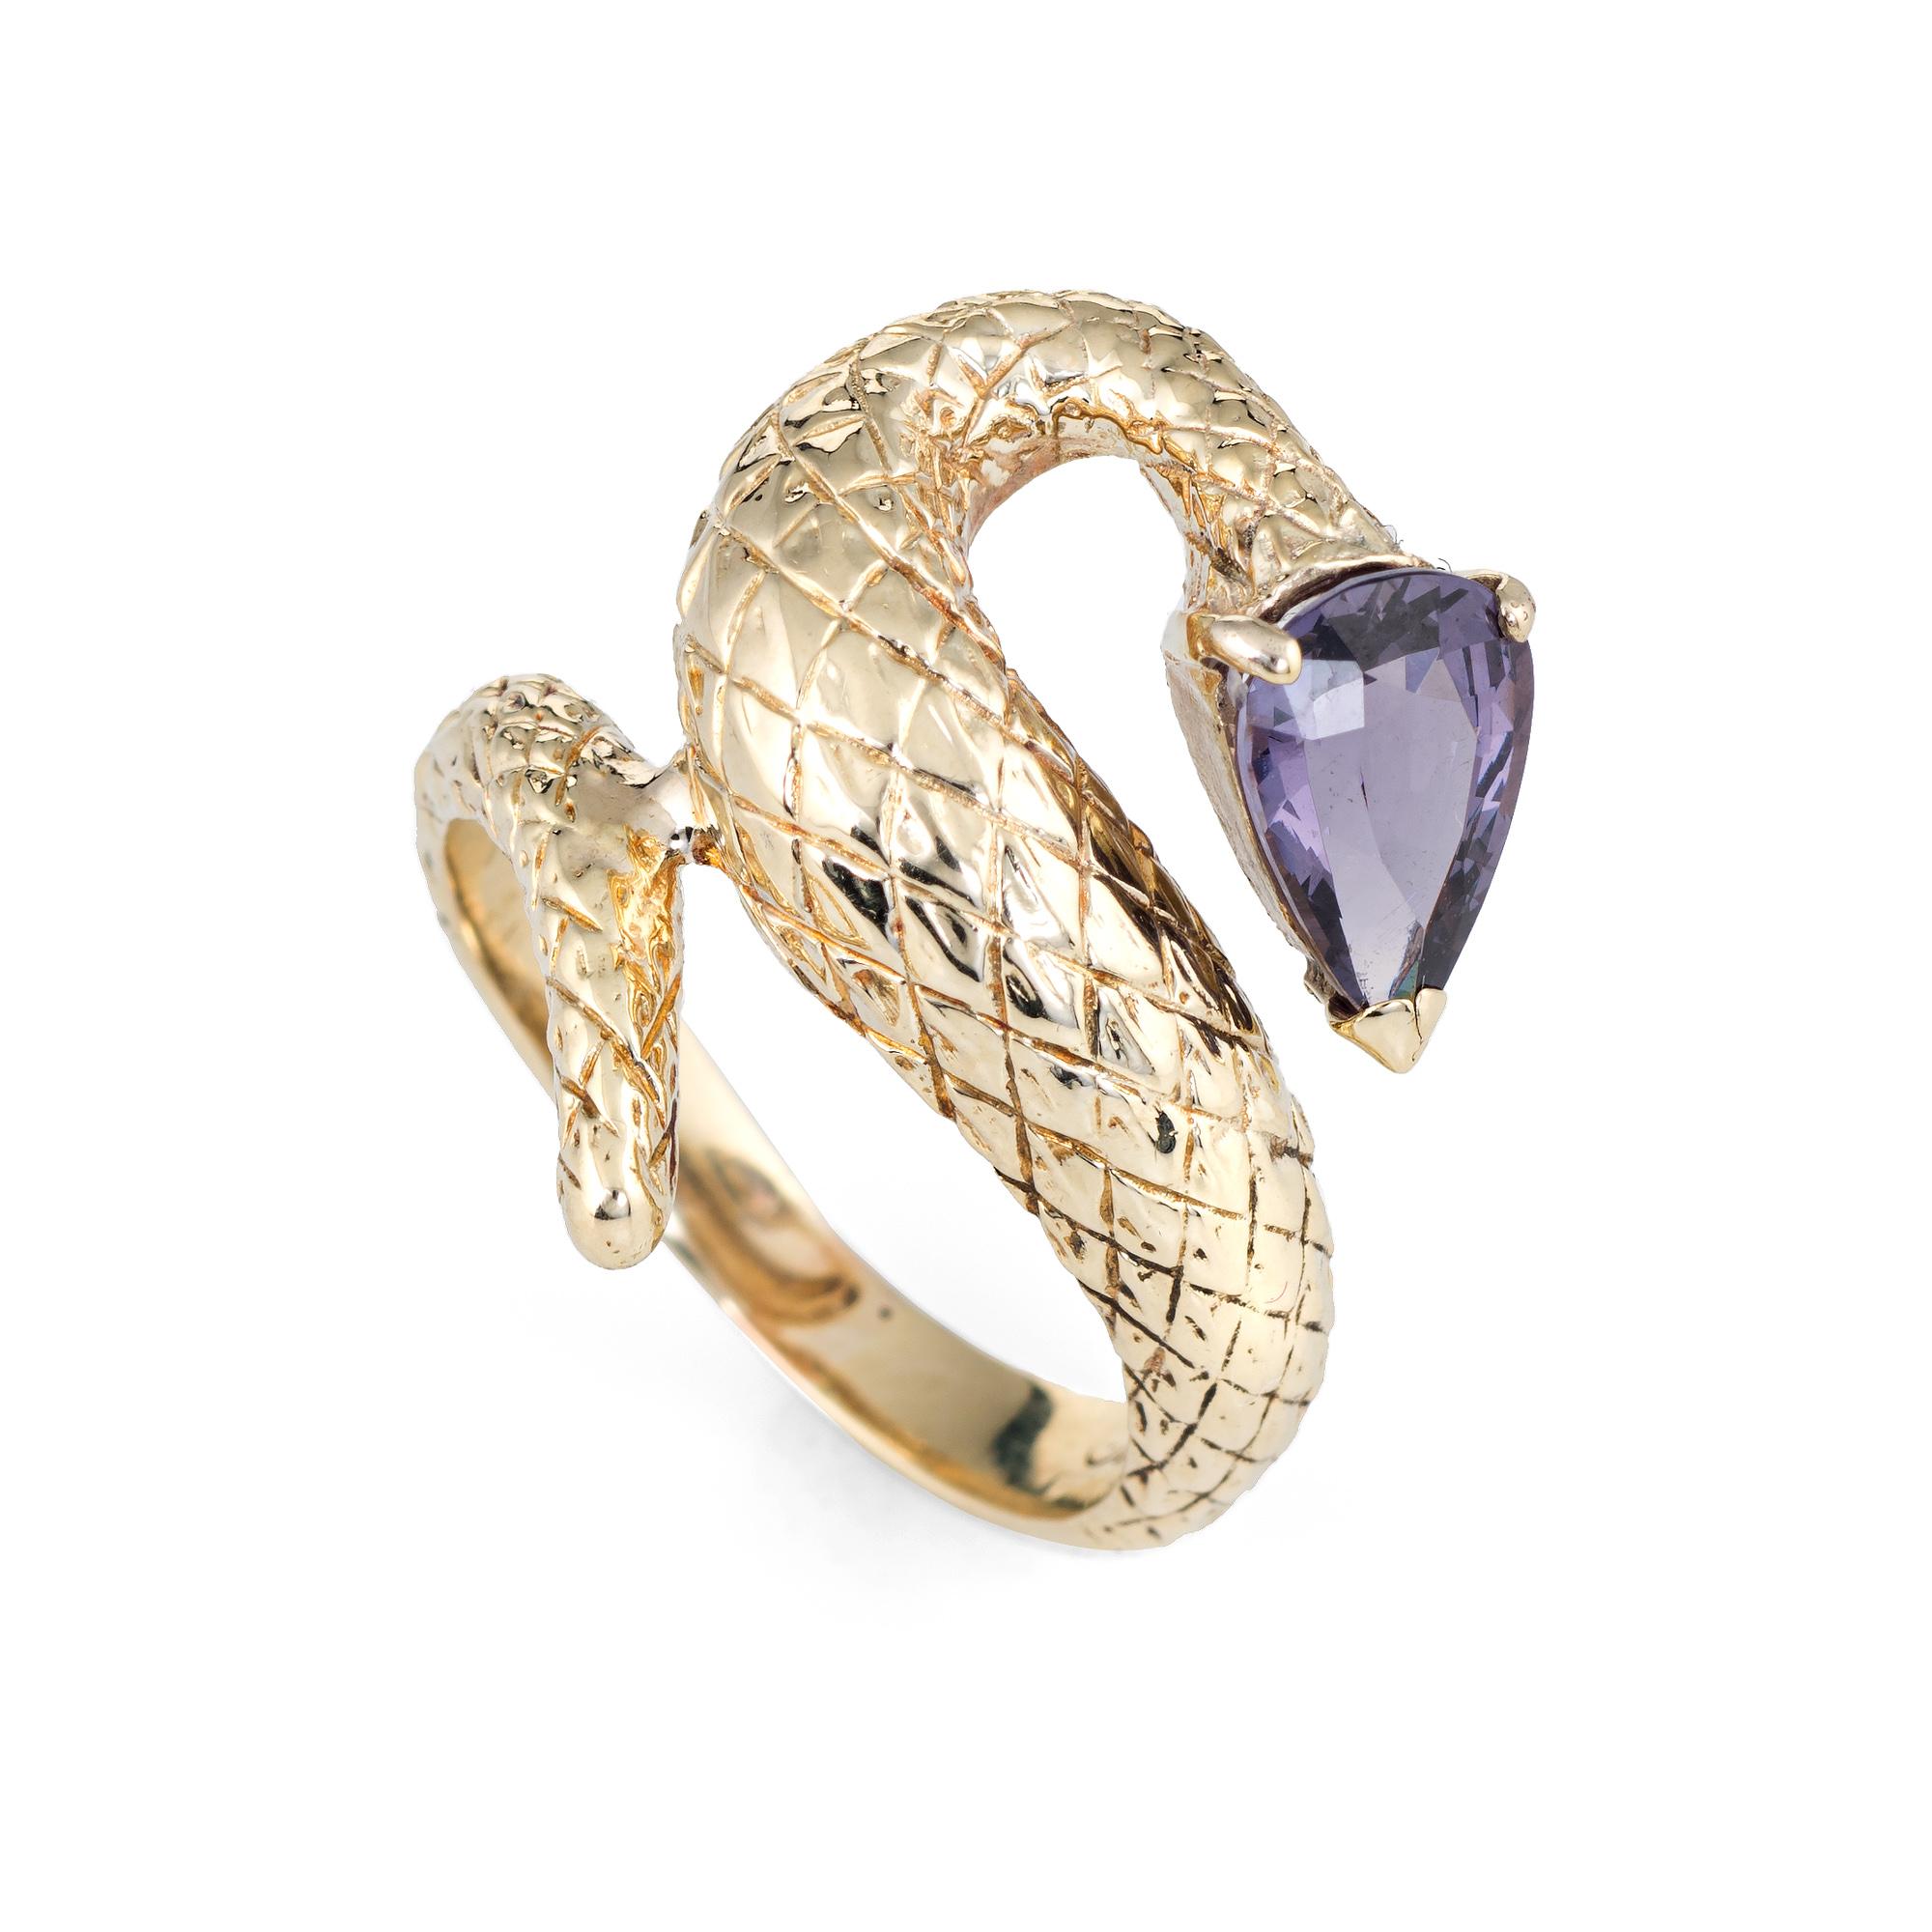 Finely detailed vintage snake ring crafted in 14 karat yellow gold.

Pear cut purple spinel measures 10mm x 6.5mm (estimated at 2.50 carats). The spinel is in excellent condition and free of cracks or chips. 

The sinuous snake sits nicely on the